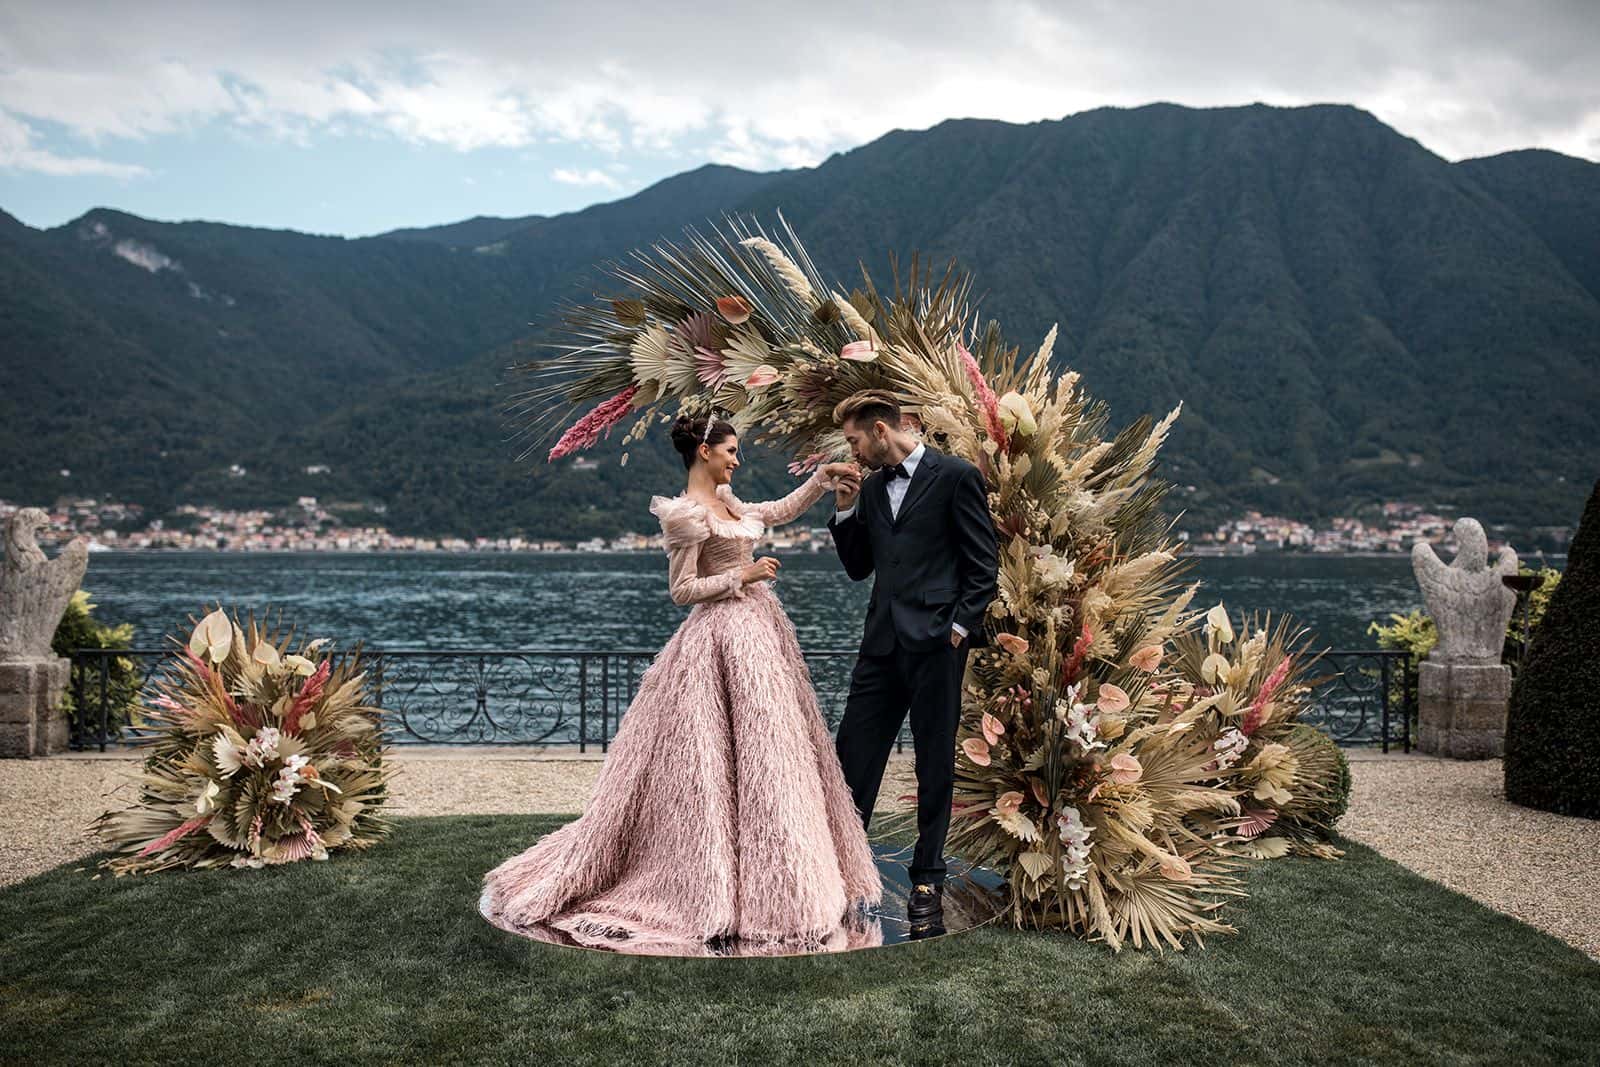 Couple during elopement wedding ceremony in Lake Como, taken by photographer who knows the pros and cons of using presets